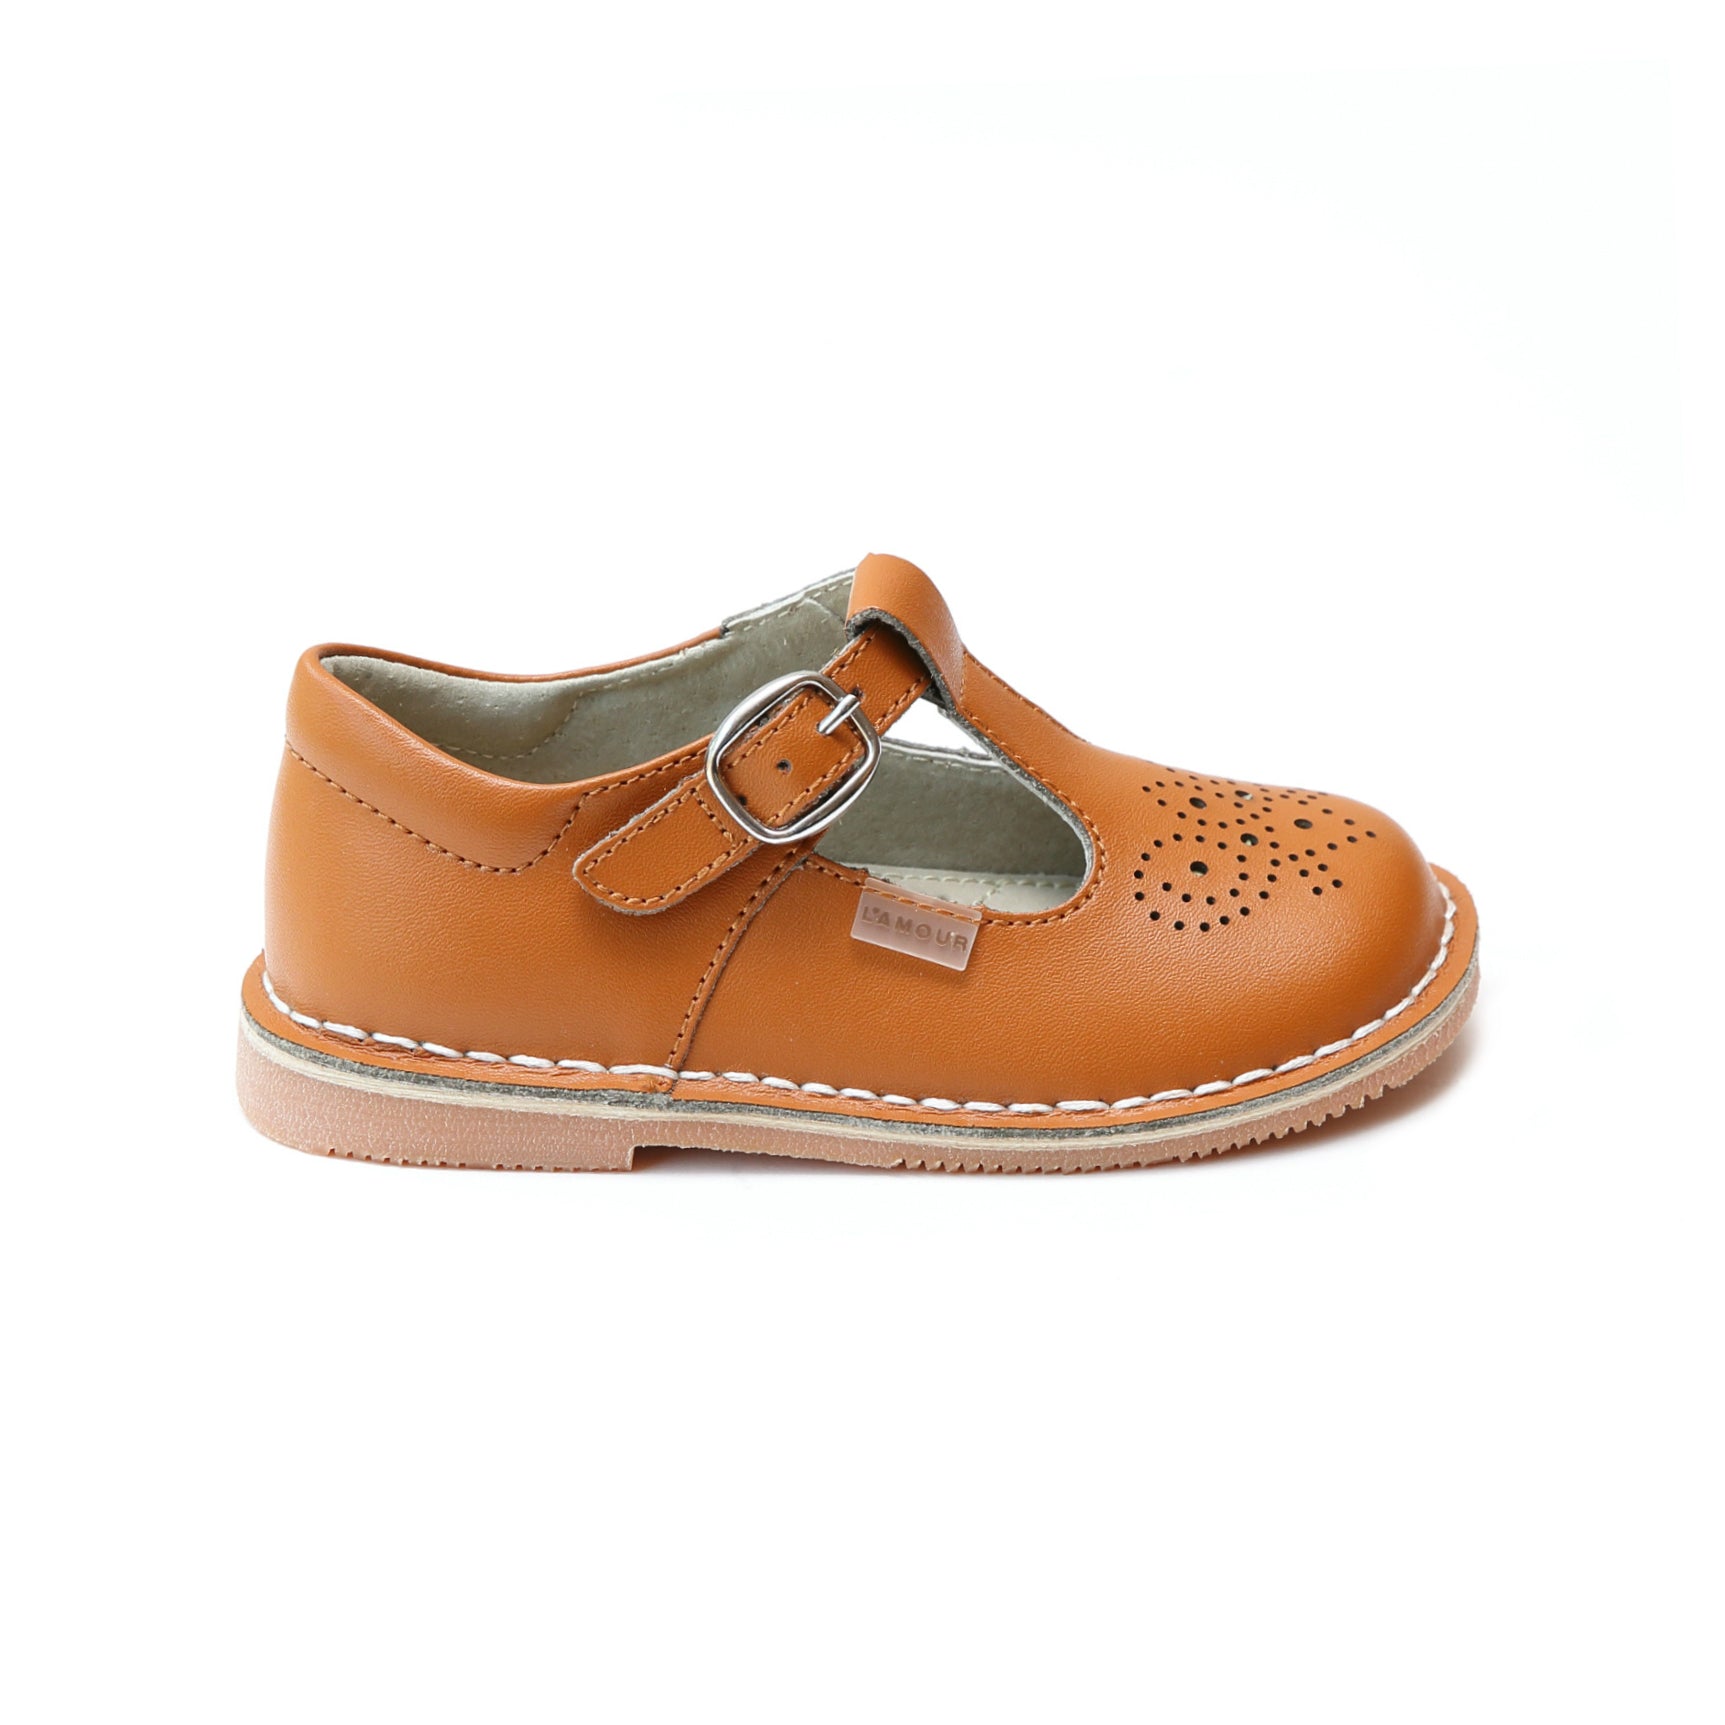 L'Amour Ollie T-Strap Leather Mary Jane Mary Janes